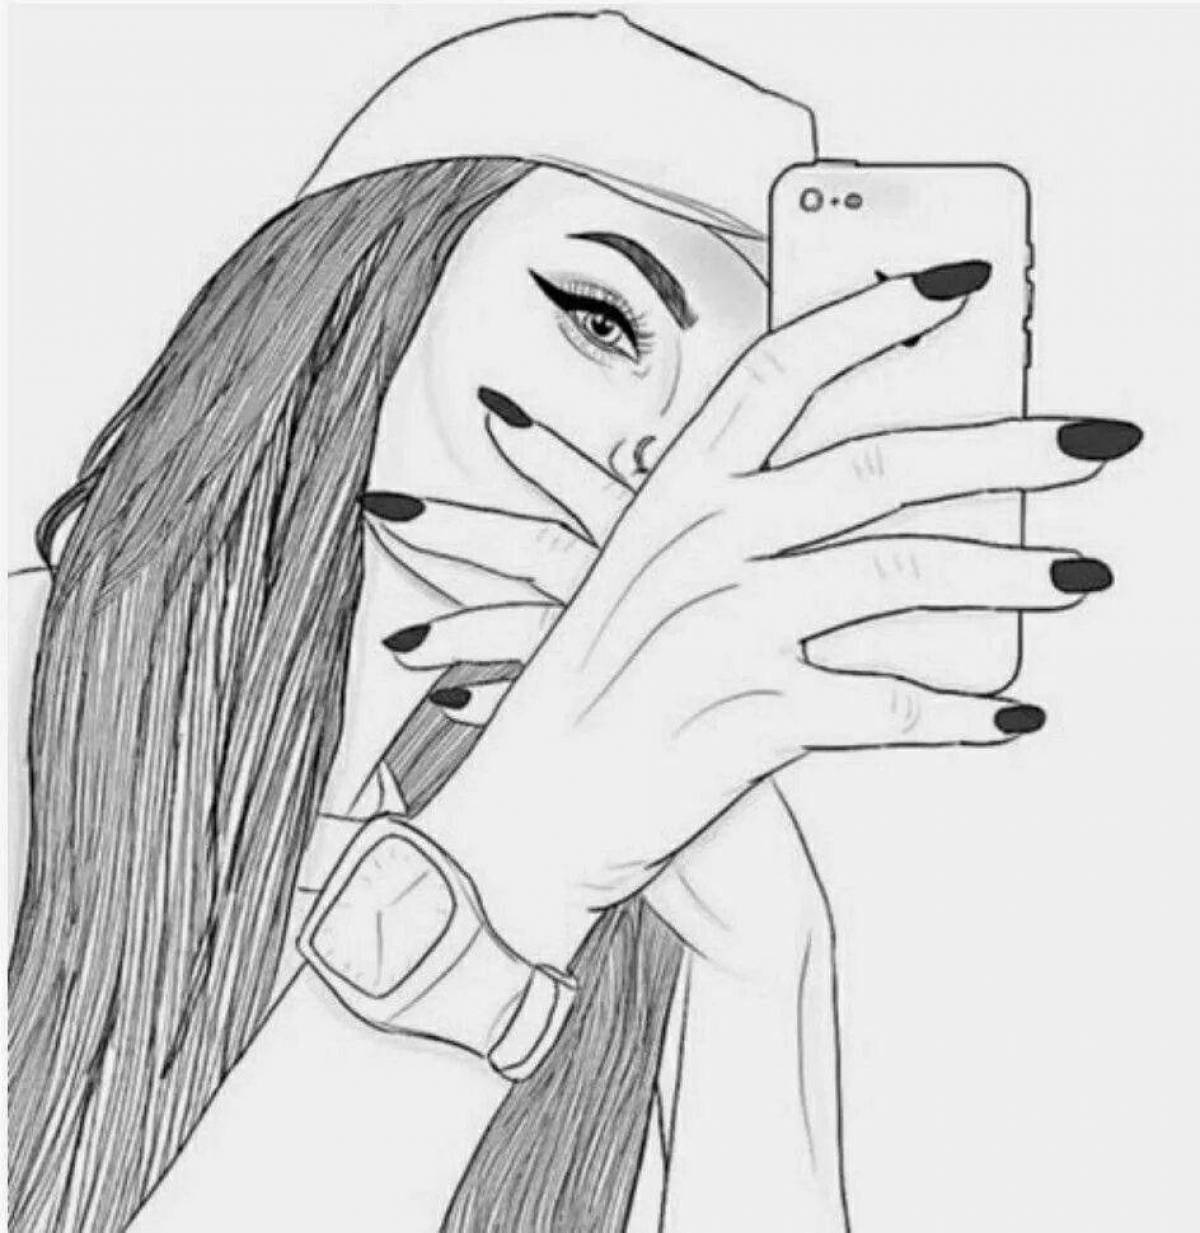 Colourful coloring of a girl with iPhones